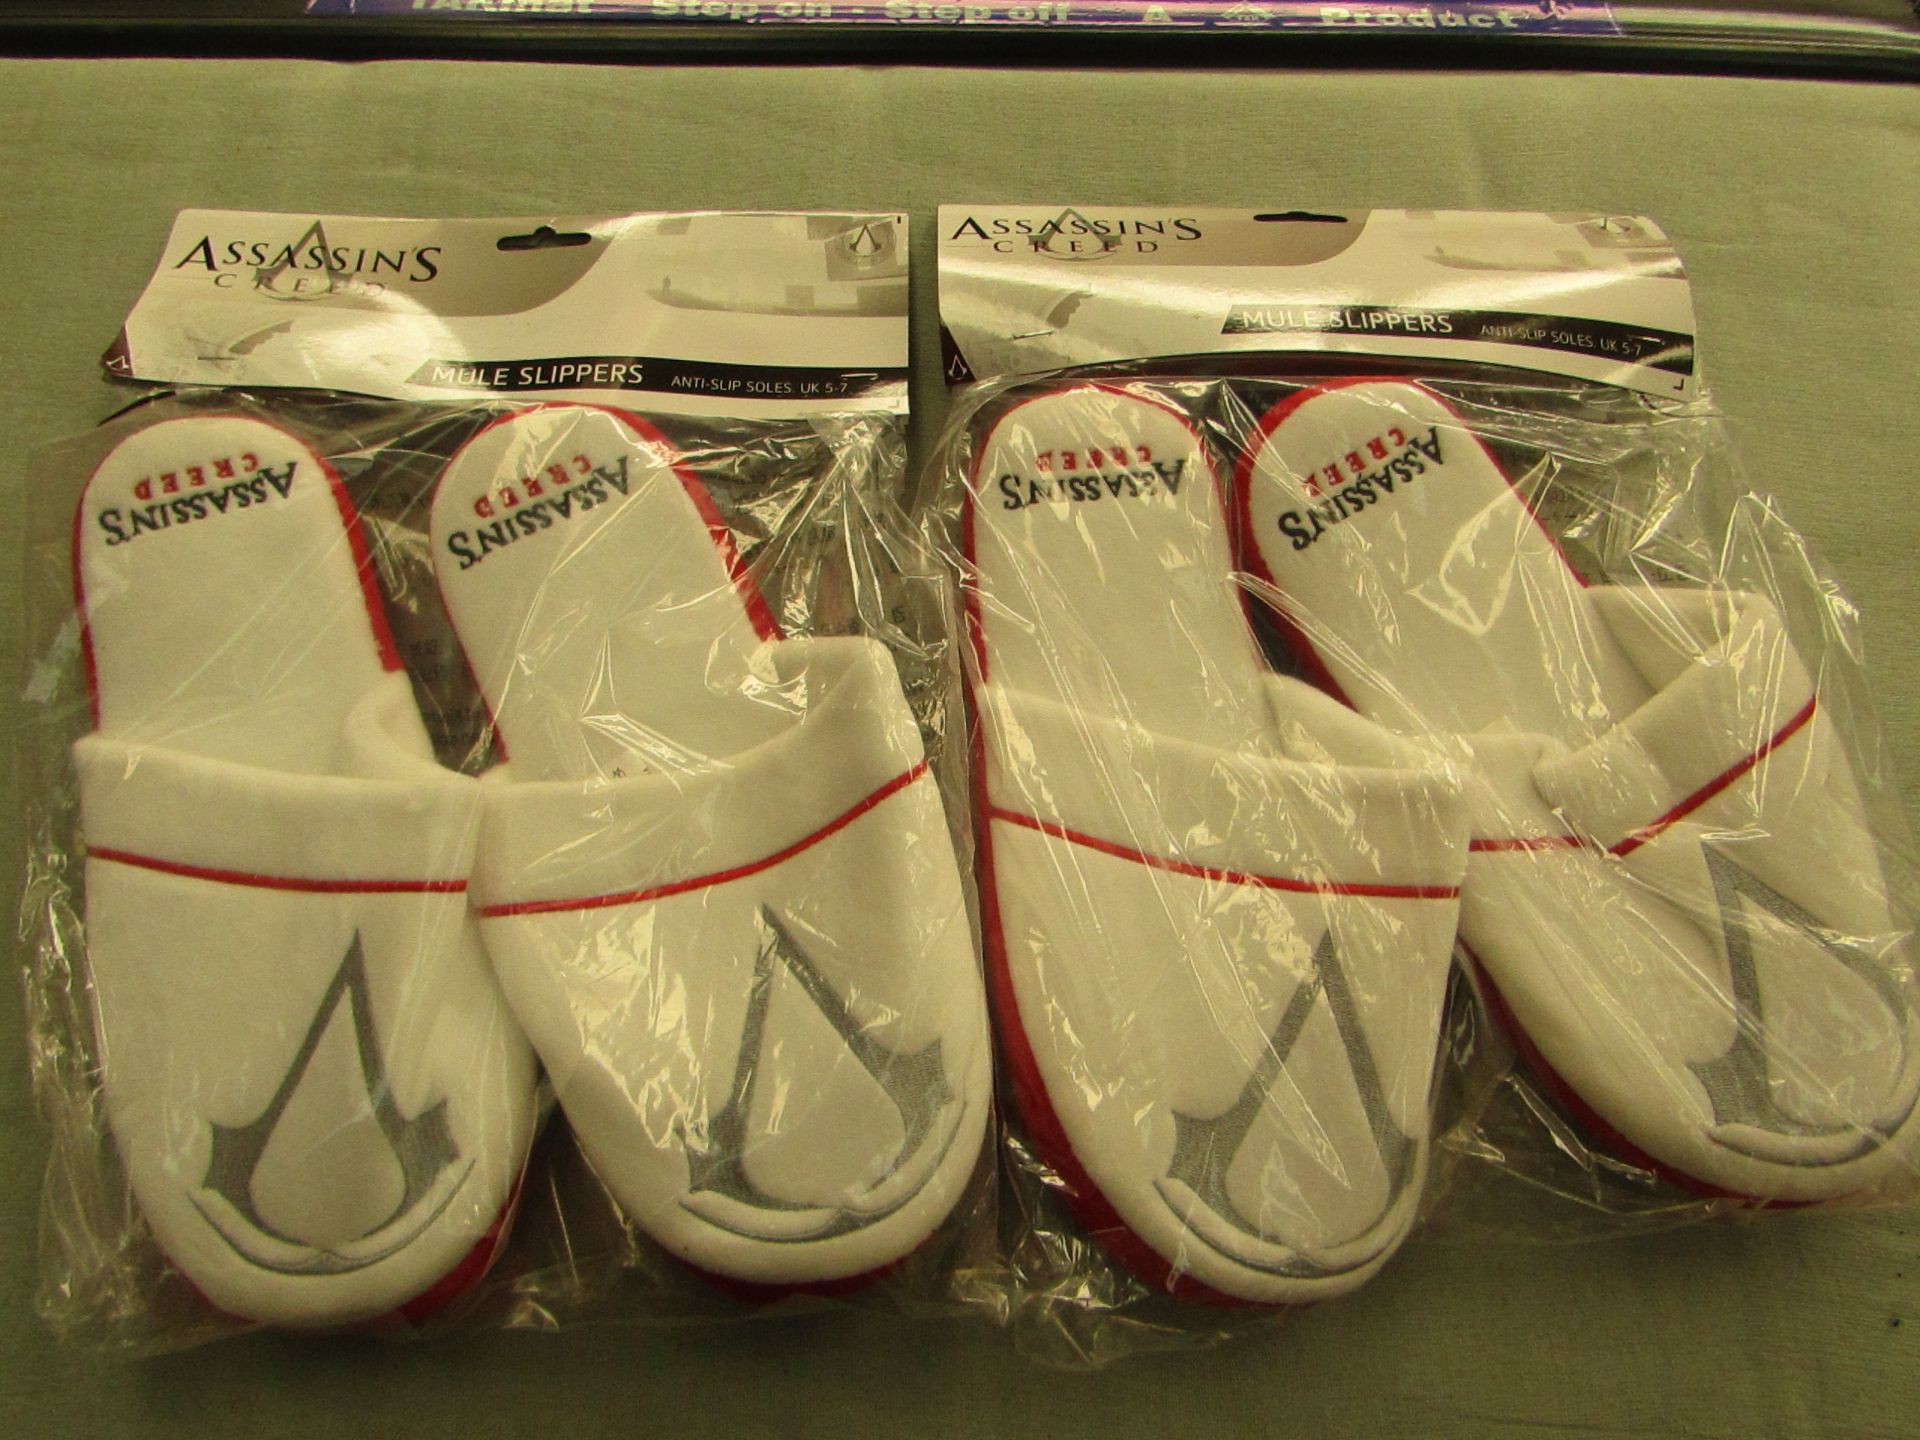 2x Assassins Creed - Anti-Slip Mule Slippers - Size 5-7 - New & Packaged.